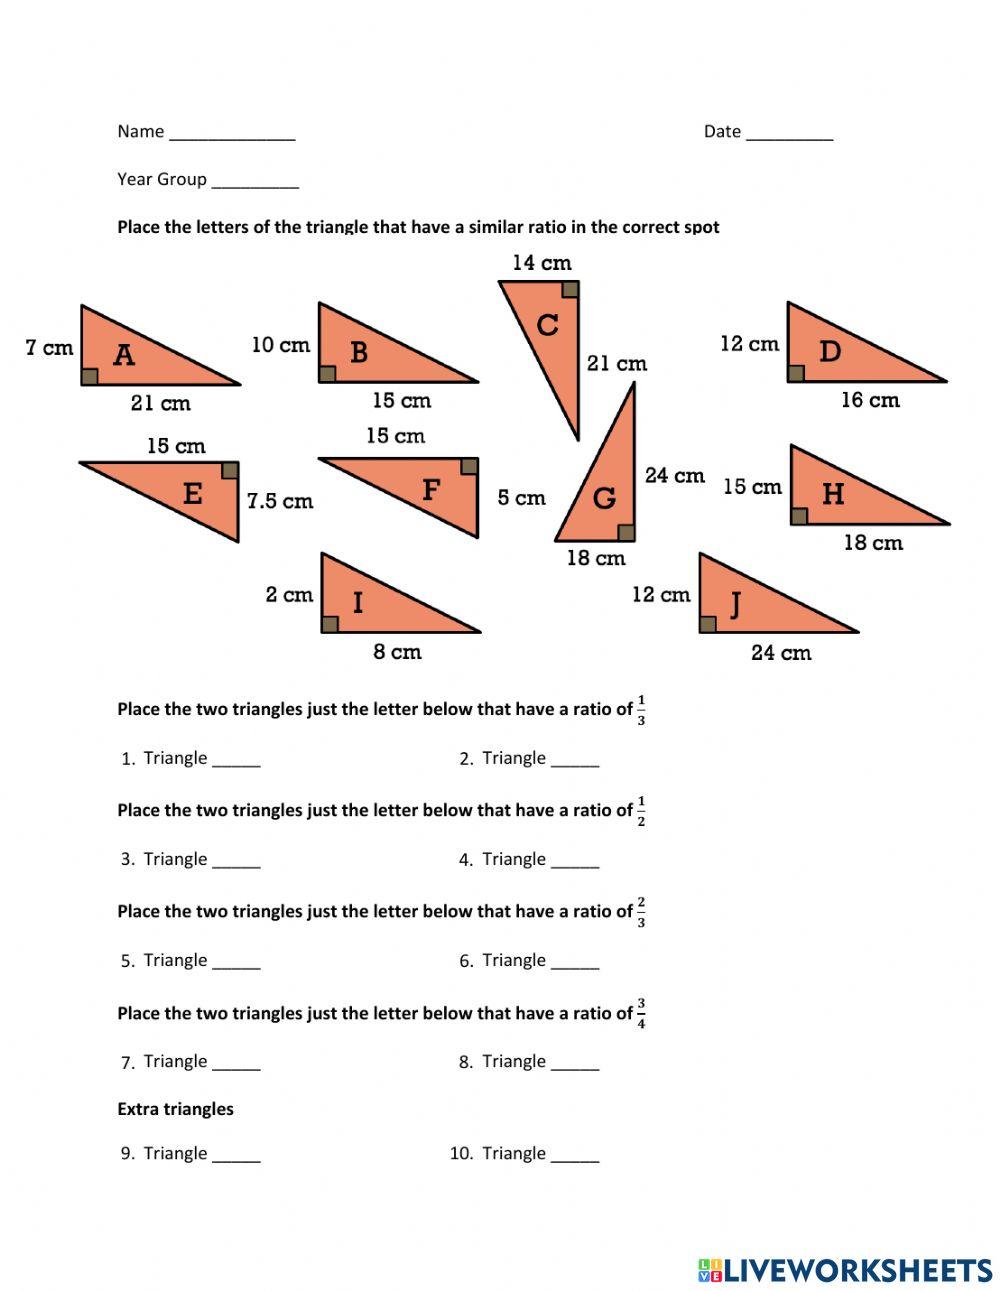 Similar Triangles - Match the Triangles that Have the Same Ratio